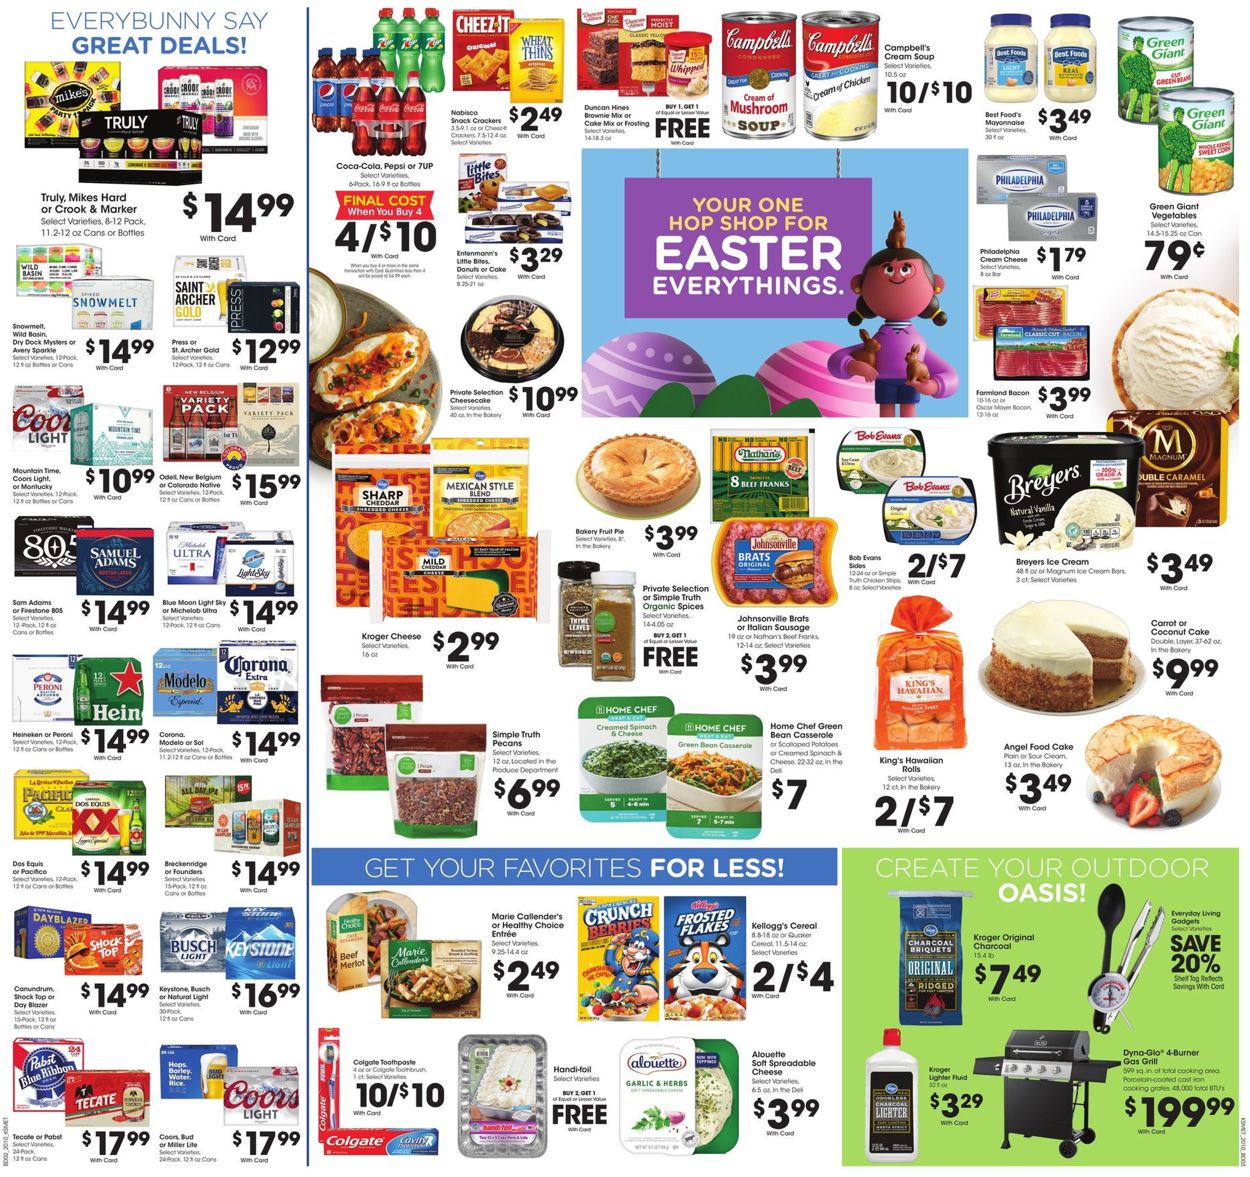 King Soopers Ad from 04/08/2020